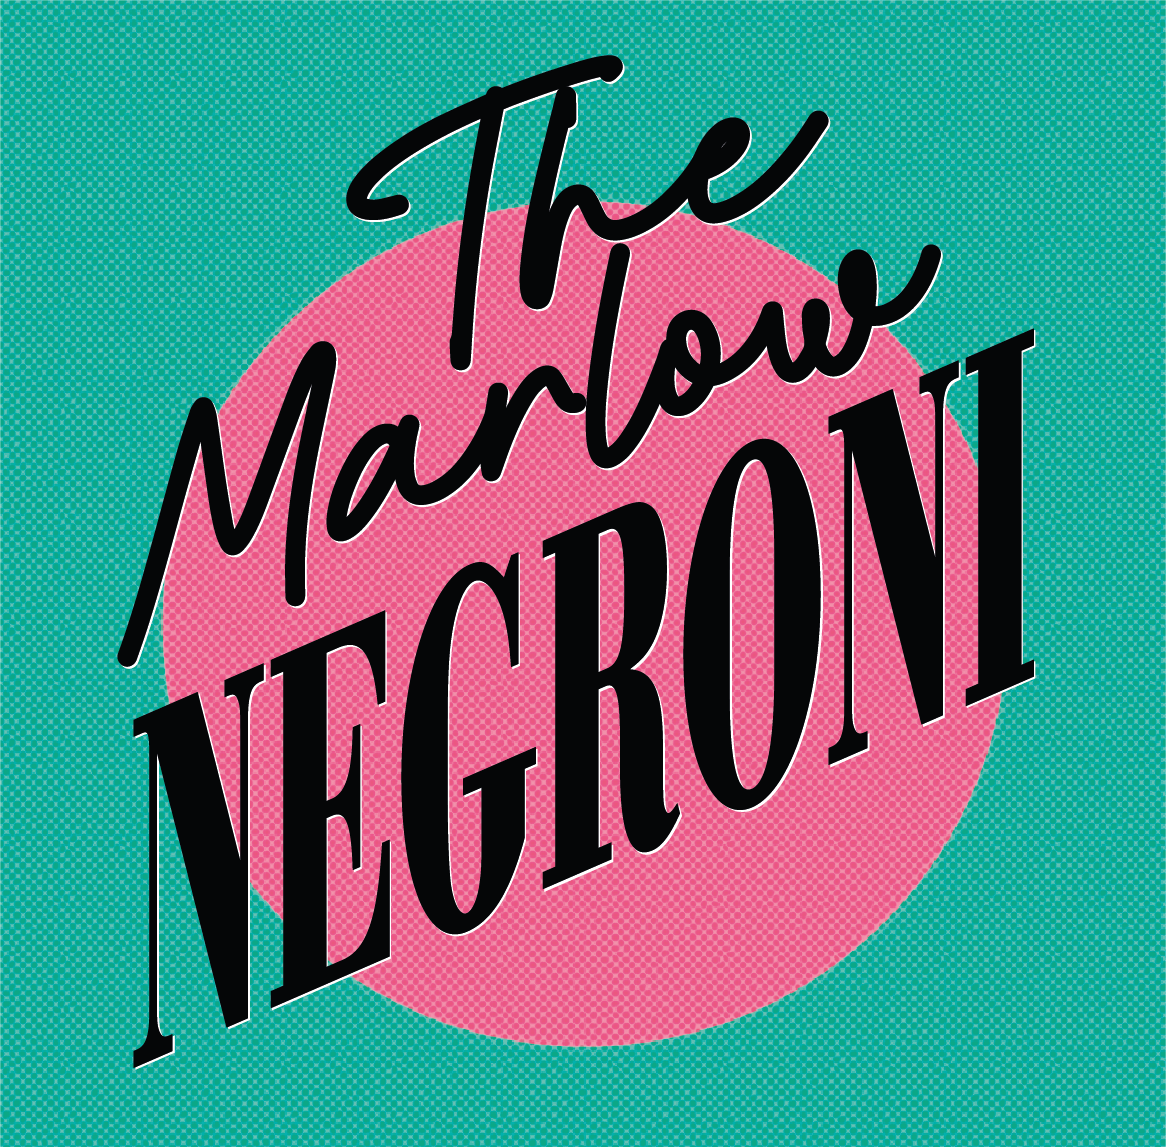 The Marlow Negroni